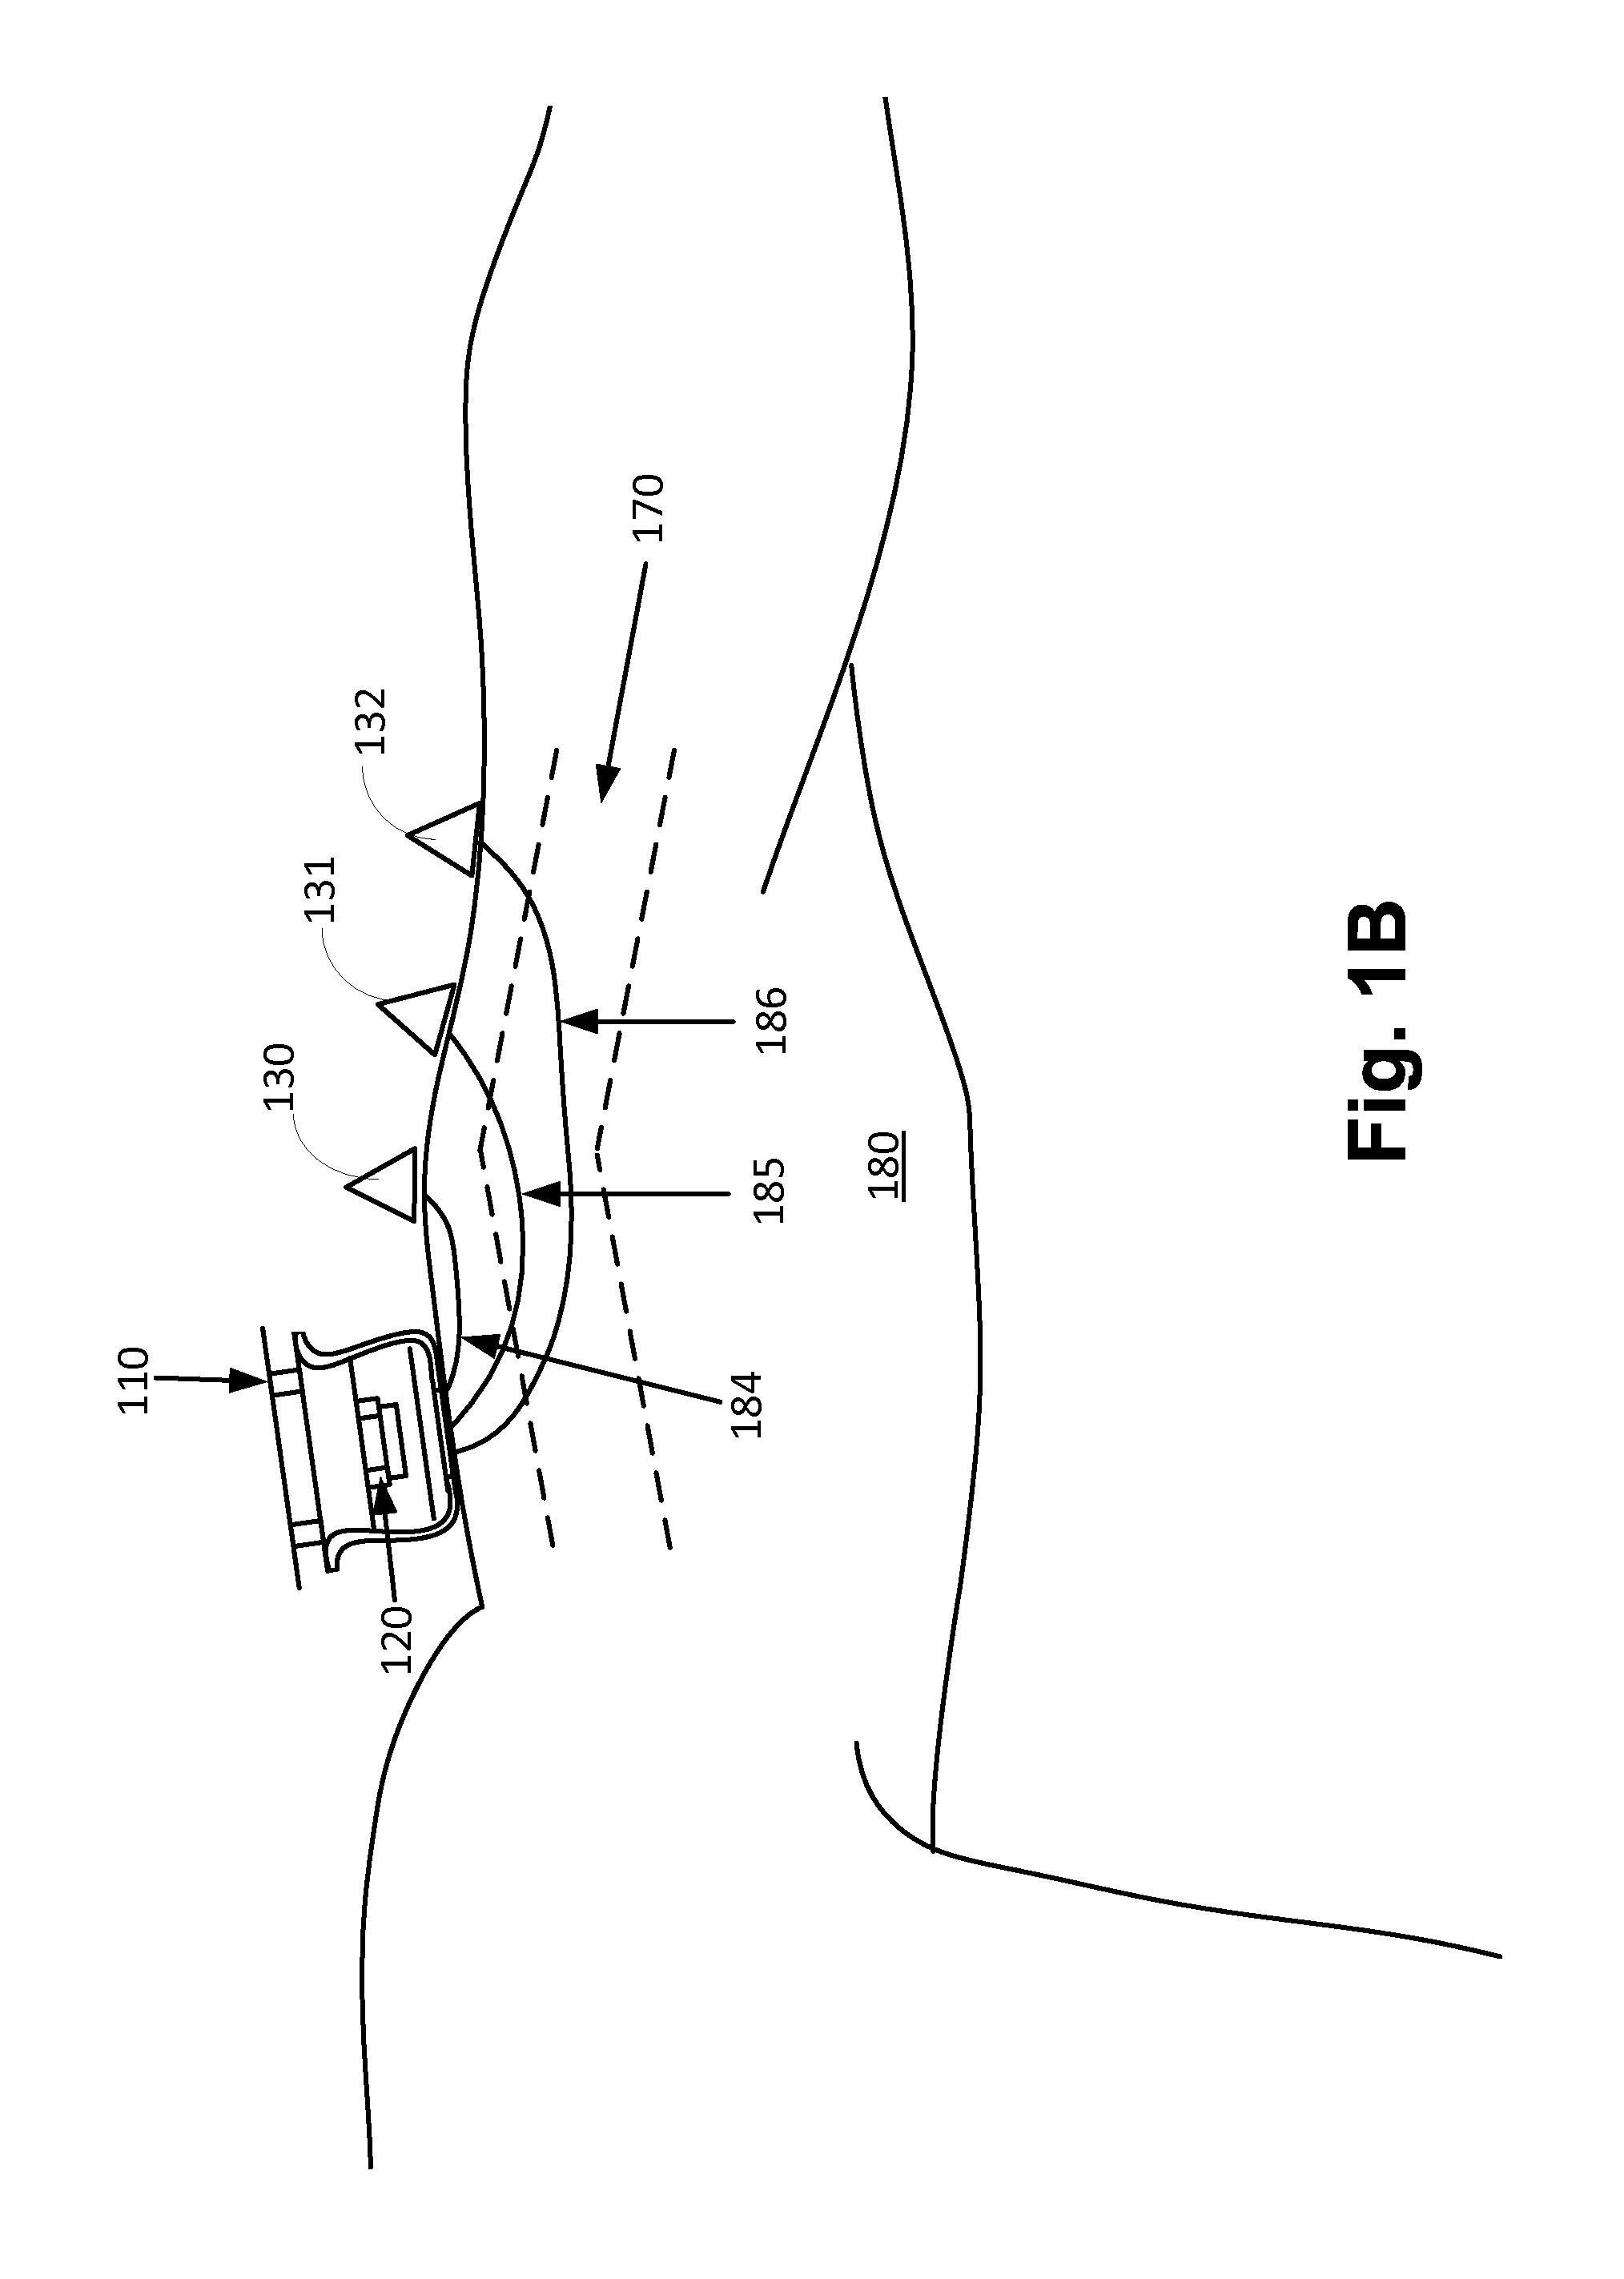 Method and apparatus for selecting wavelengths for optical measurements of a property of a molecular analyte